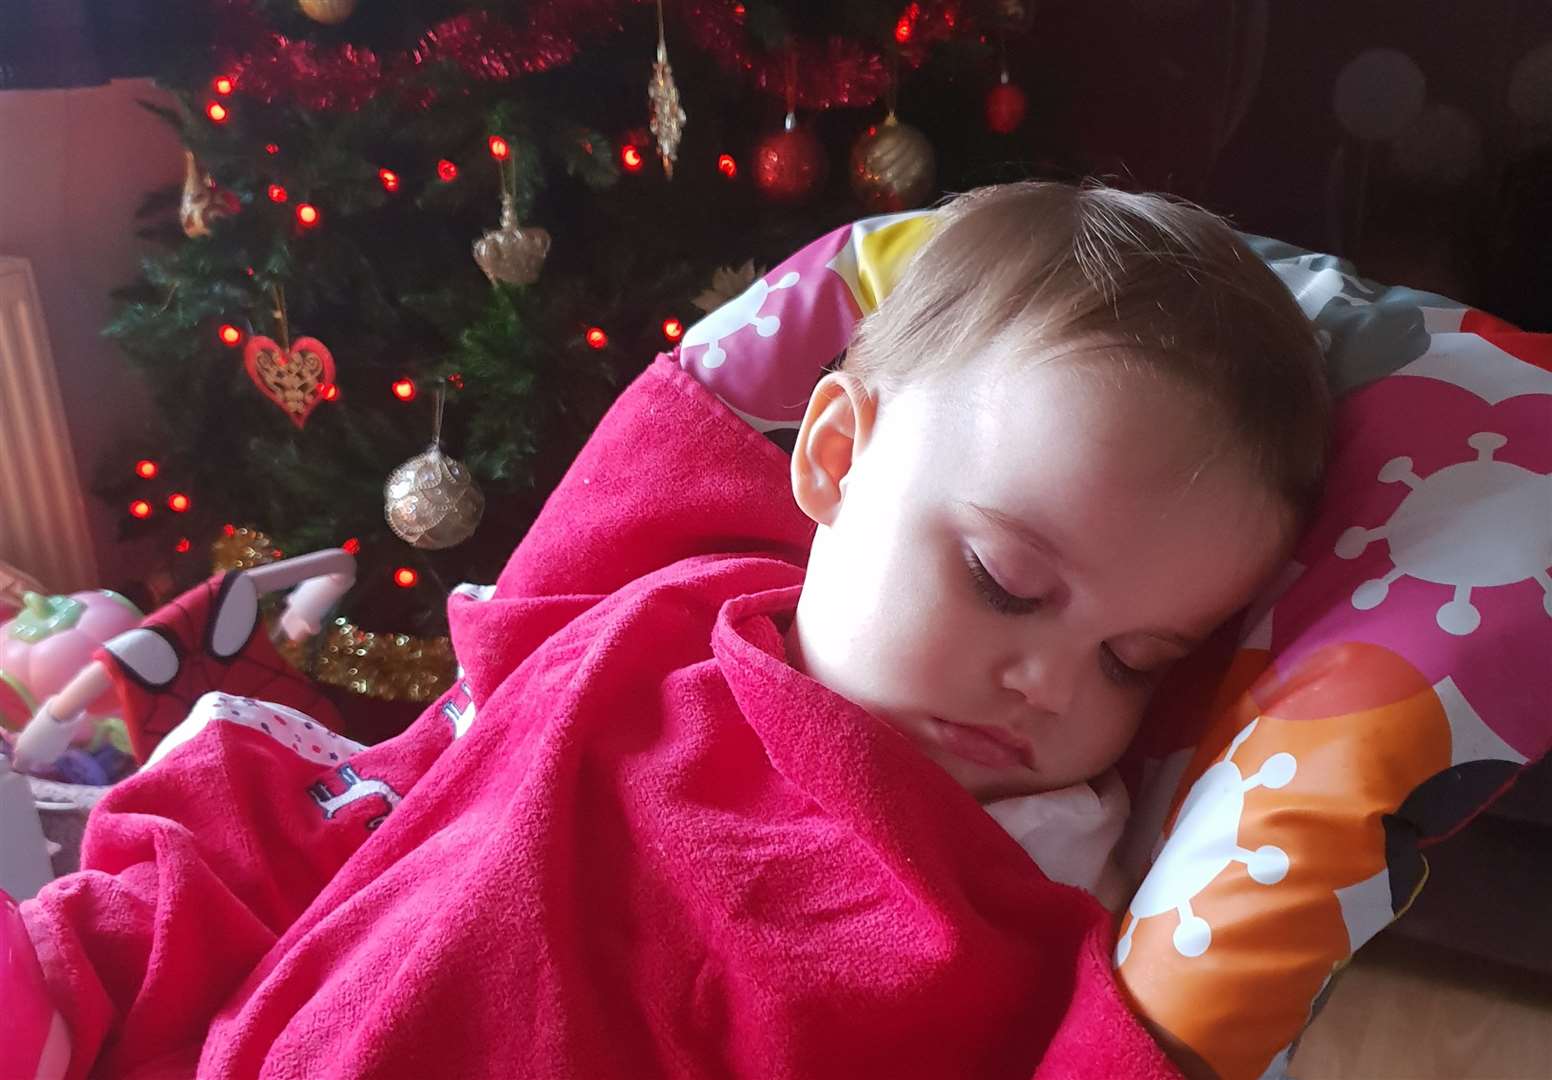 Chloe Ford having a sleep next to the Christmas tree the day before she died